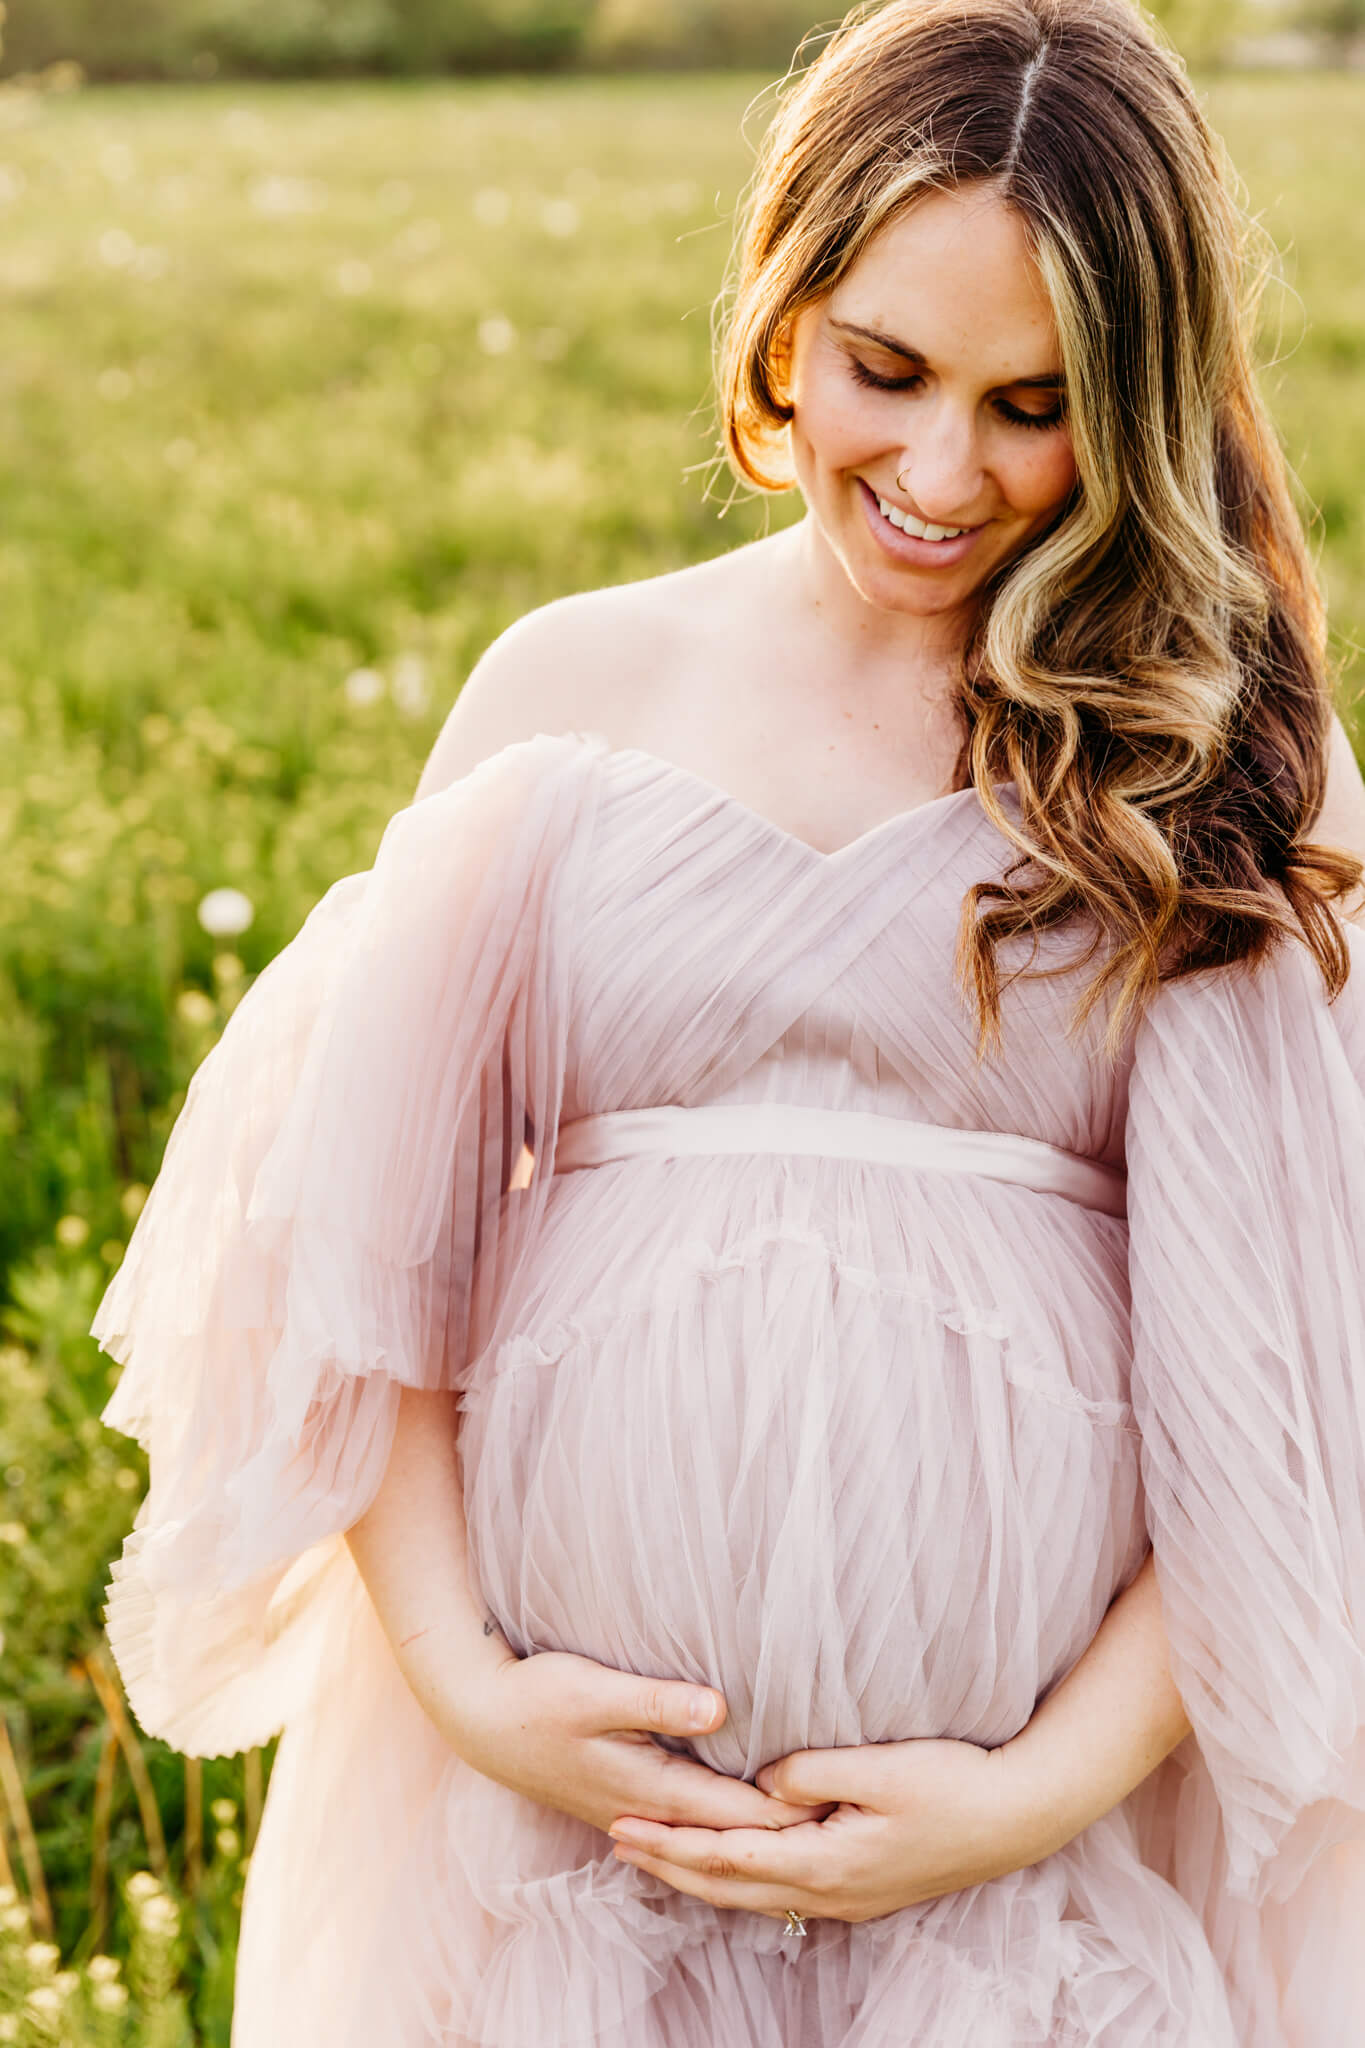 mom to be holds her baby bump and smiles as she looks down in a grassy field near Omro WI